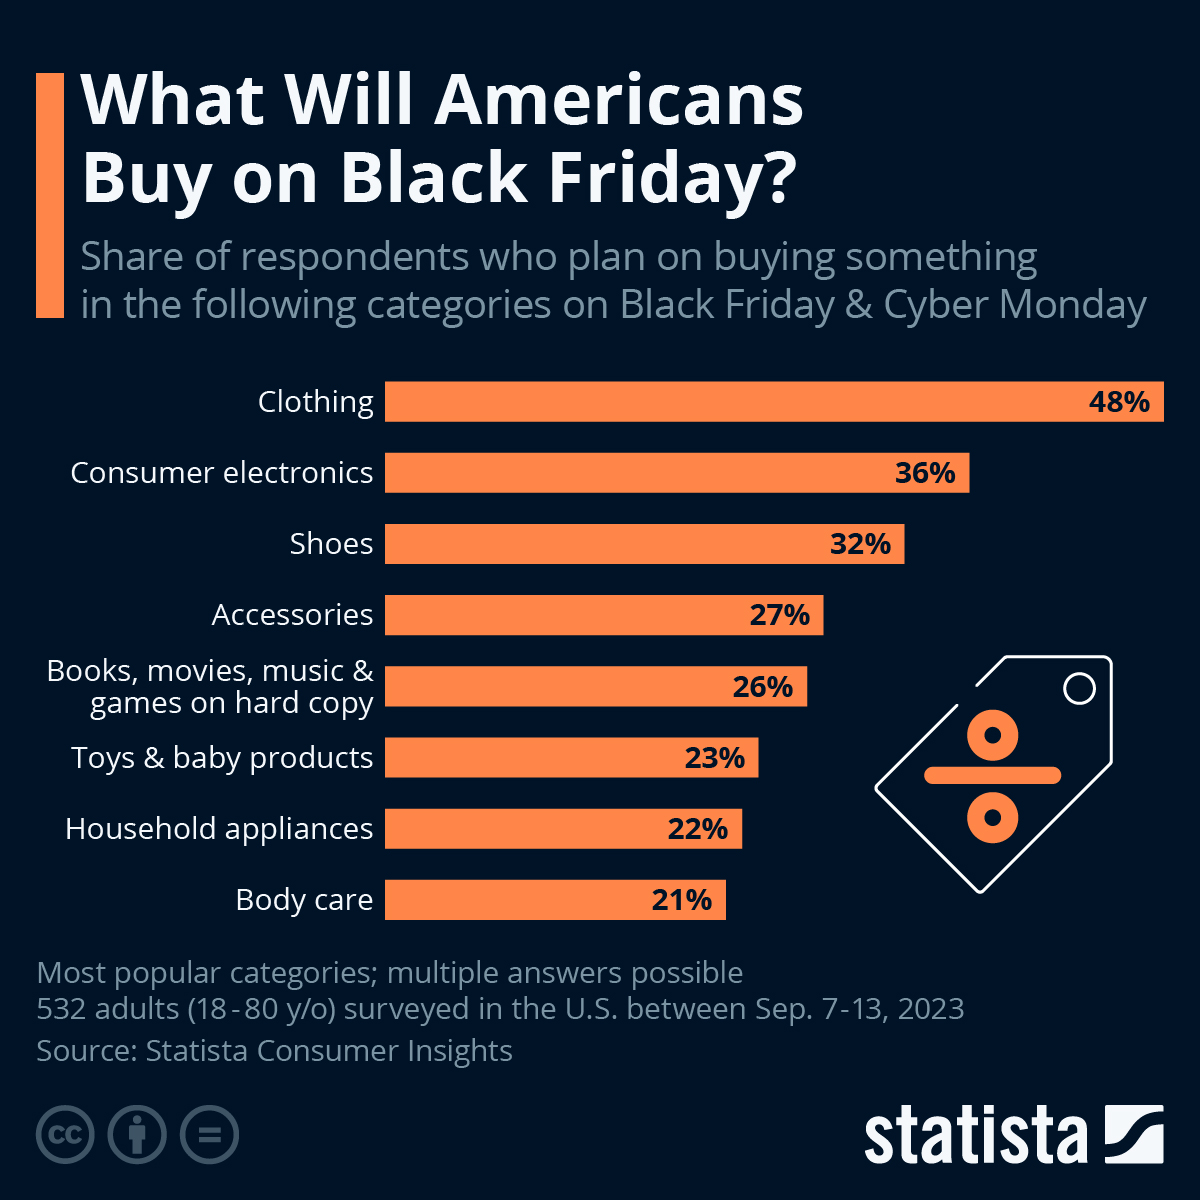 what will americans buy on black friday?